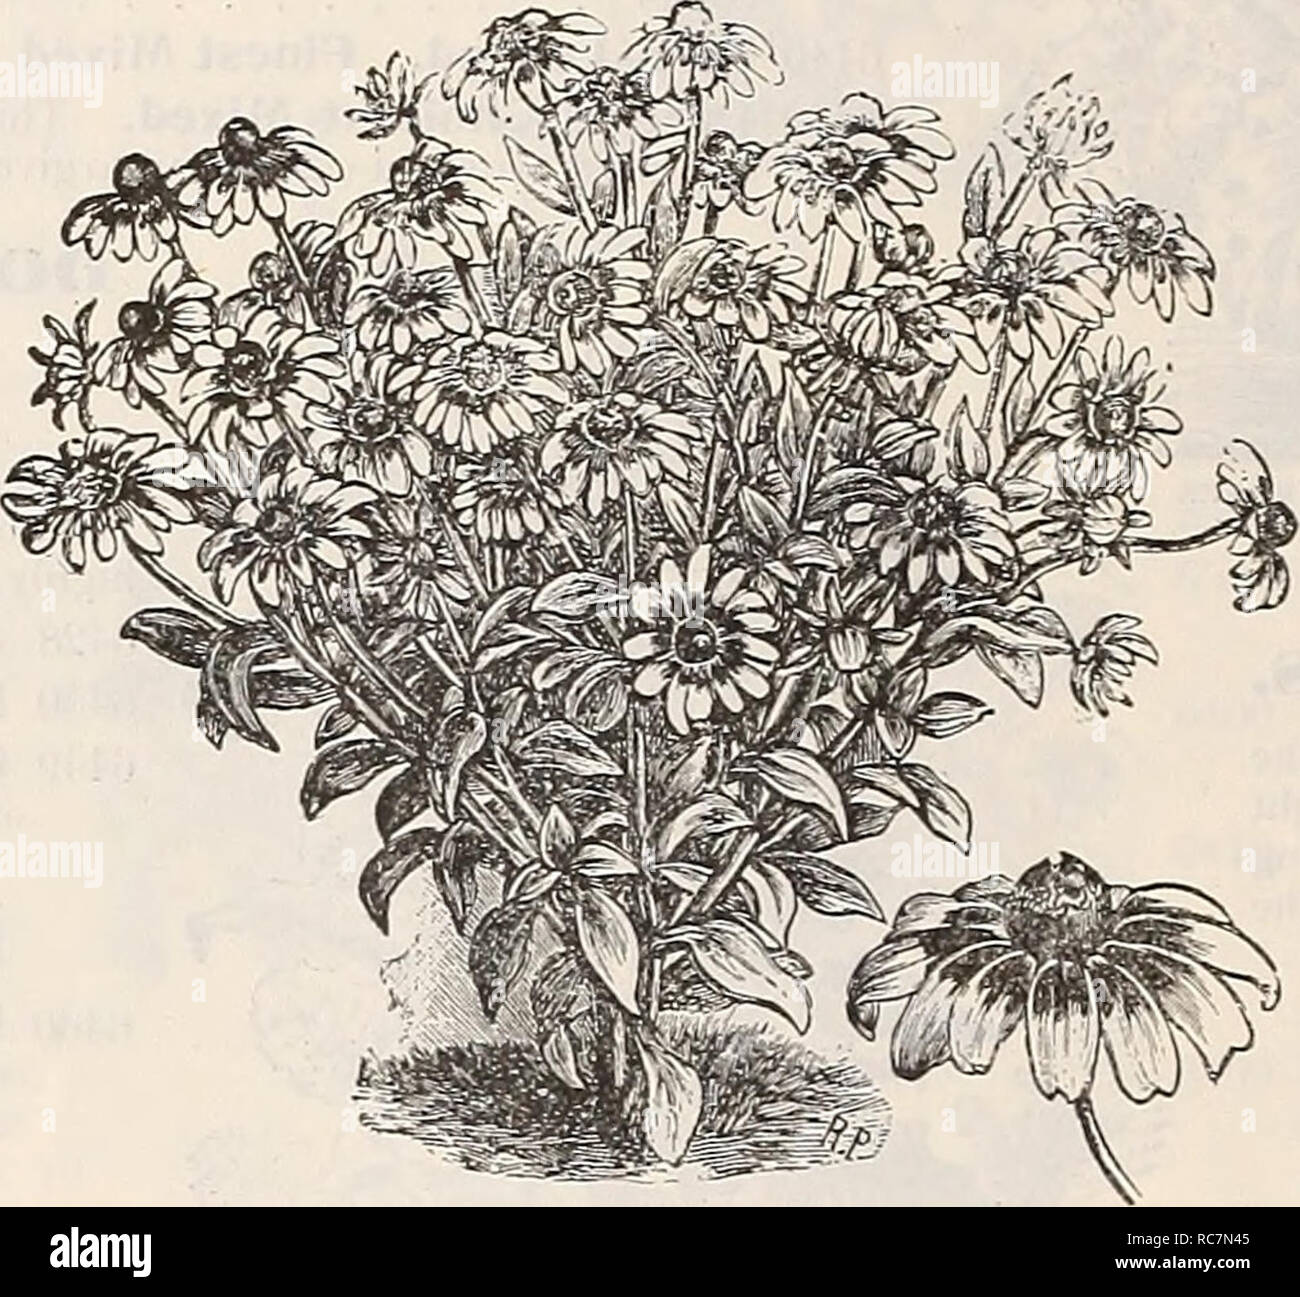 . Dreer's garden calendar : 1899. Seeds Catalogs; Nursery stock Catalogs; Gardening Equipment and supplies Catalogs; Flowers Seeds Catalogs; Vegetables Seeds Catalogs; Fruit Seeds Catalogs. RUDBECKIA BlCOLOR SUPERBA 6507 Kicinds Zanzibarensis. SCABIOSA. (Mourning Bride, or Sweet Scabious.) One of our handsomest Sum- mer border plants, producing in great profusion very double flow- ers in a variety of shades and colors: a splendid flower for table bouquets, etc. ; hardy an- nual. (See cut. ) PER PKT. 6510 Tall Mixed. Double, all colors ; 2 feet. ( &gt;/. 40 cts 5 6520 Dwarf Mixed. Dou- ble, all Stock Photo